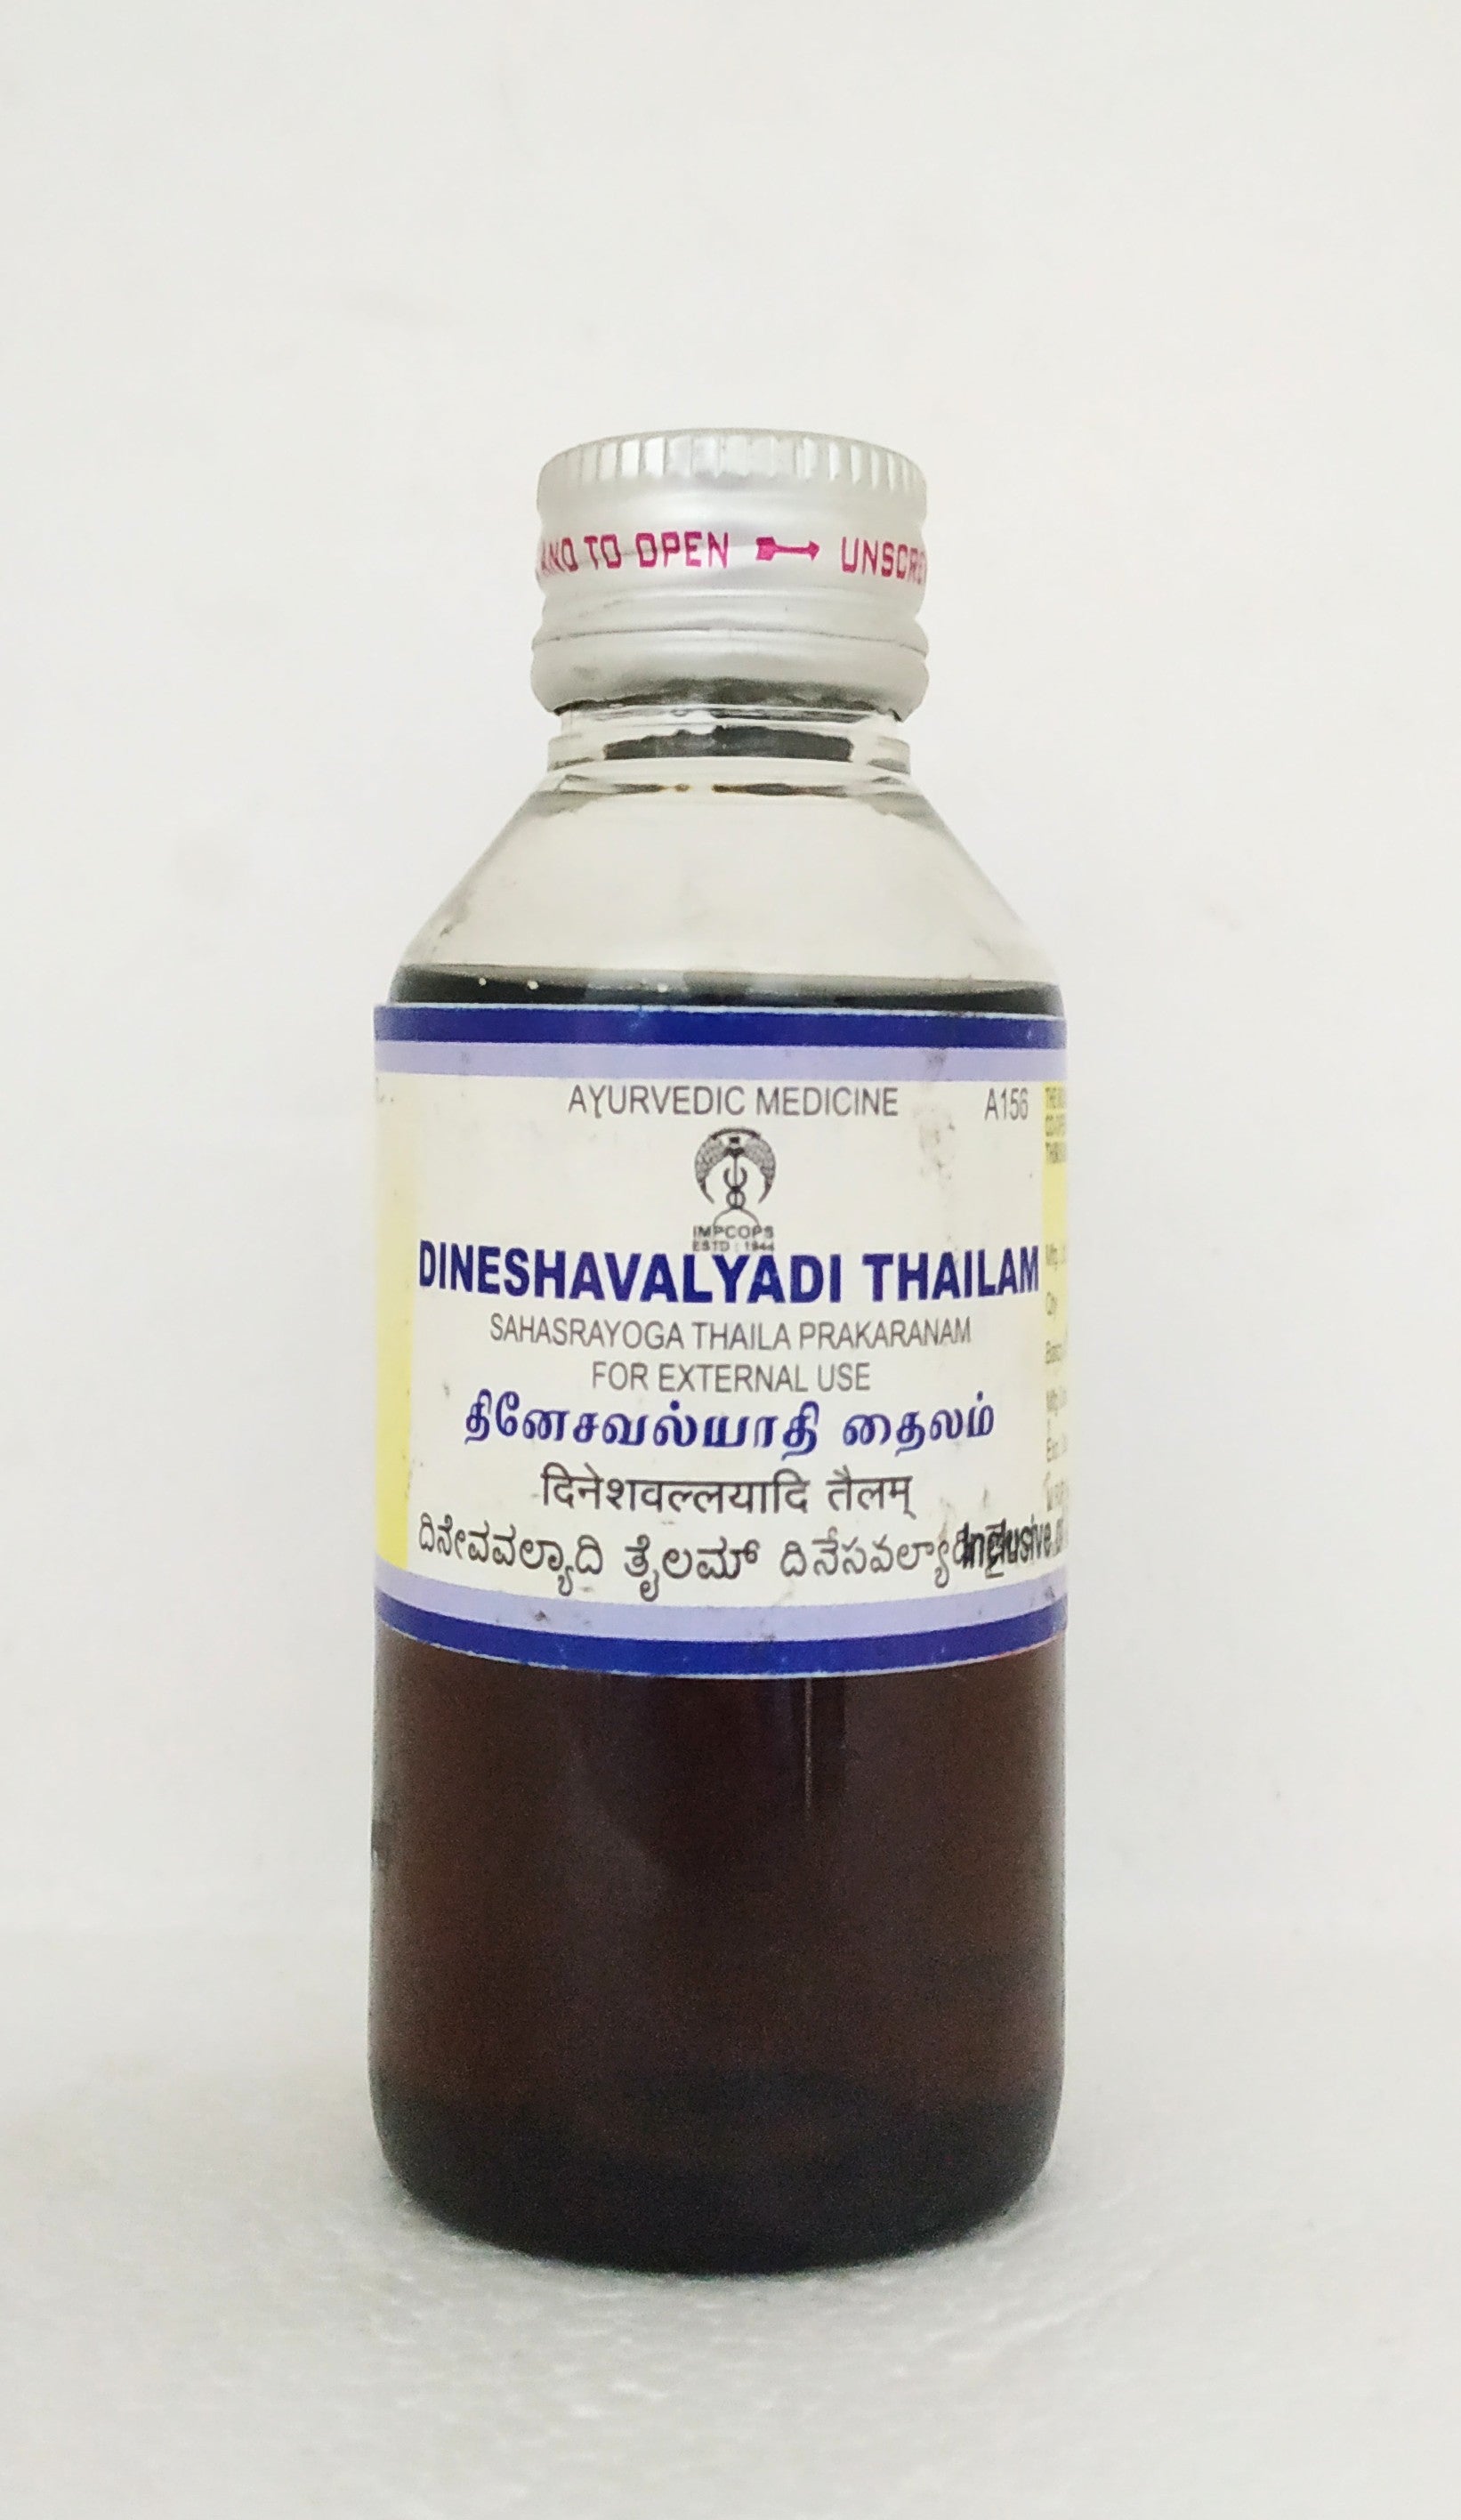 Shop Impcops Dineshvalyadi Thailam 100ml at price 122.00 from Impcops Online - Ayush Care